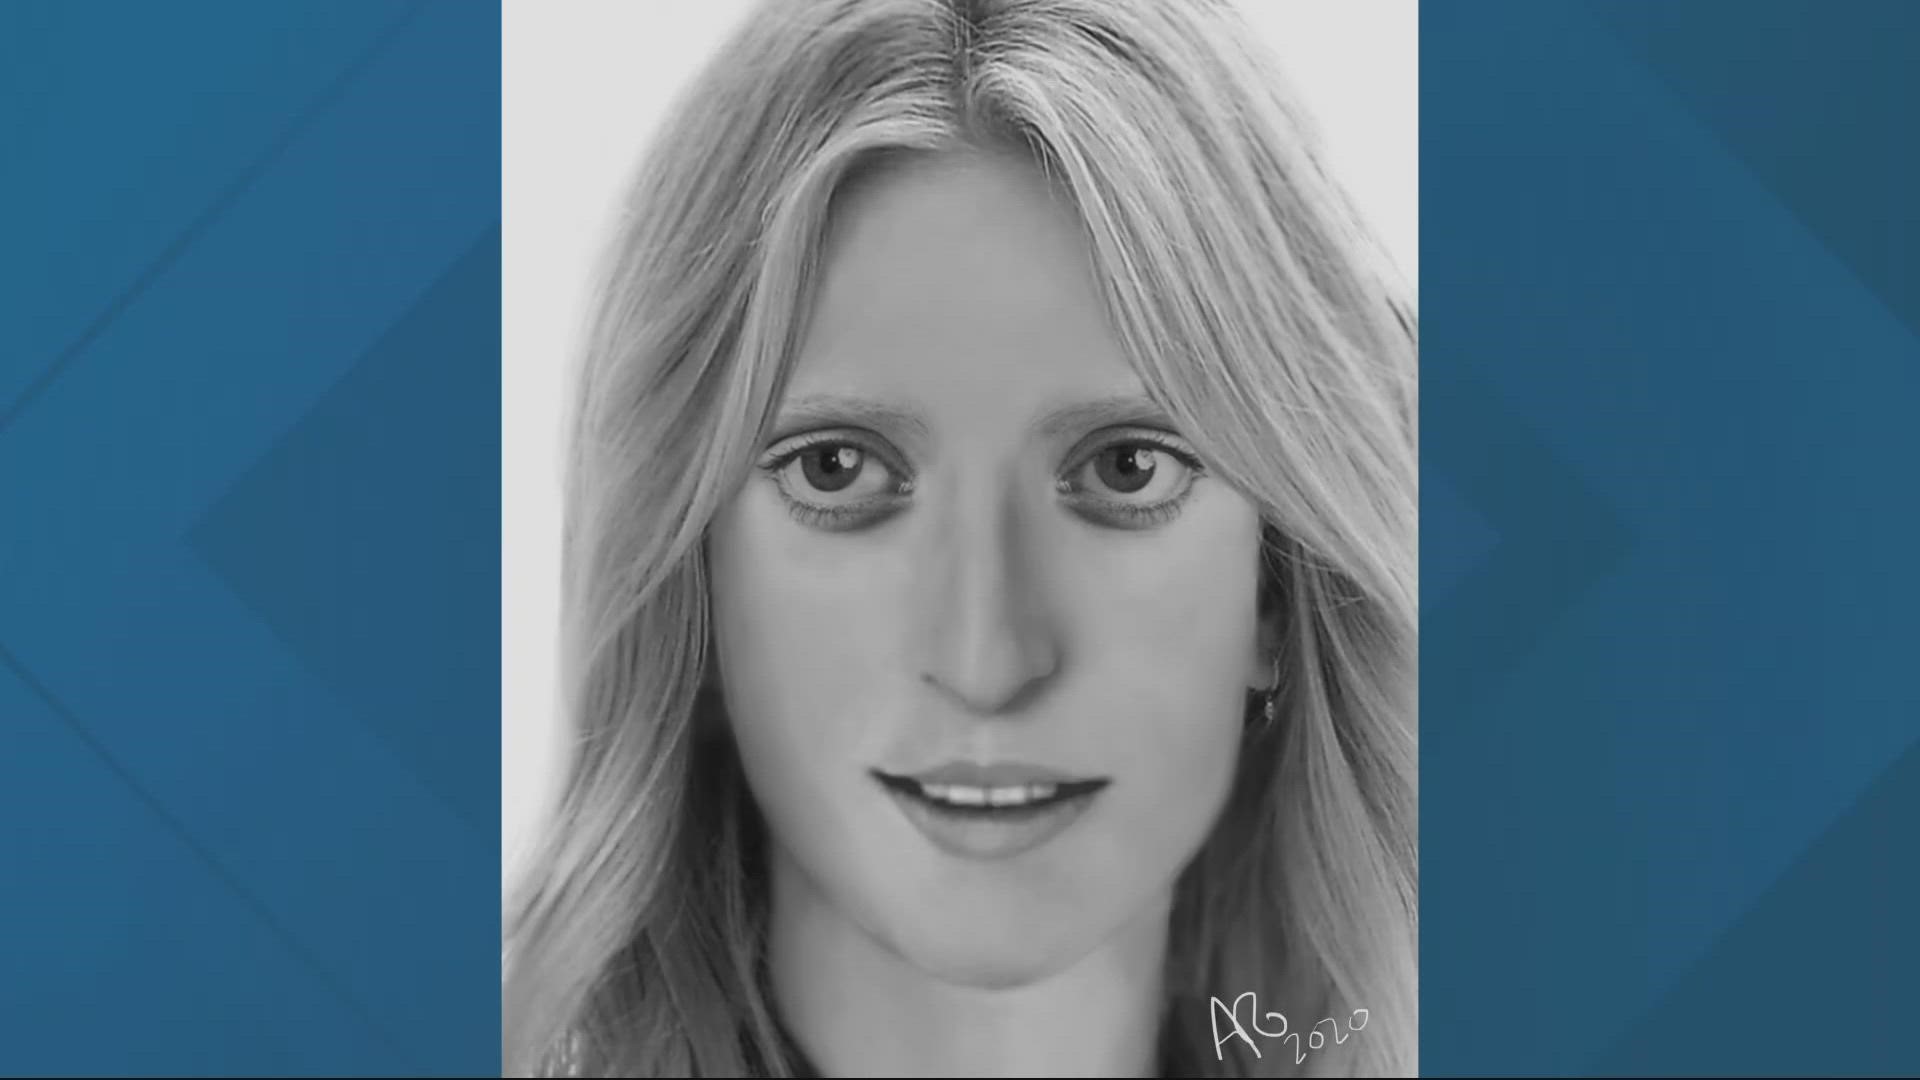 Investigators are trying to identify the remains of a young woman found buried in a wooded hillside in August of 1978.